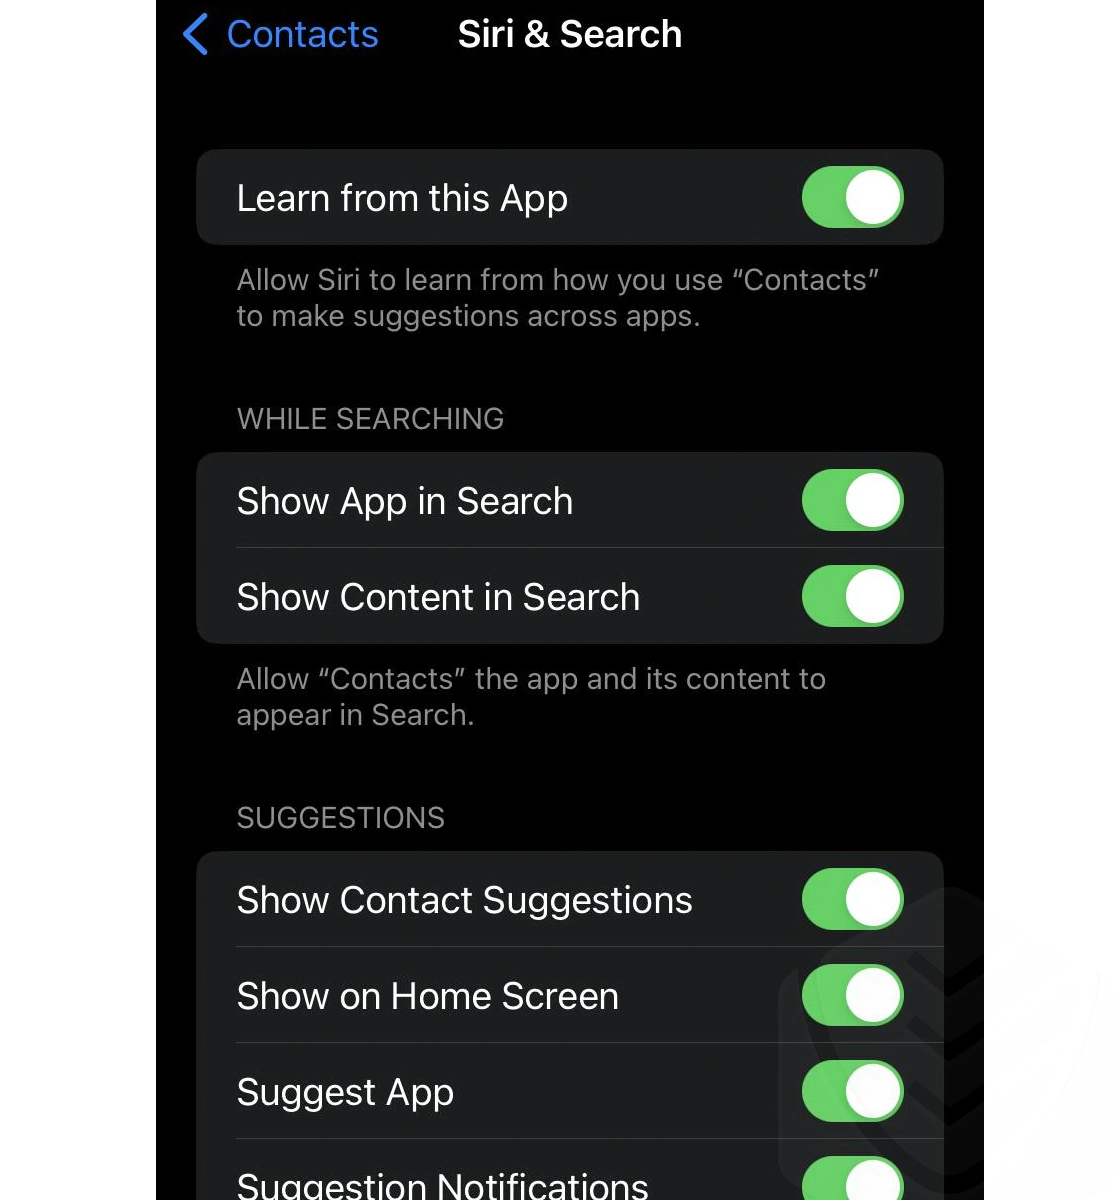 The options for configuring Siri